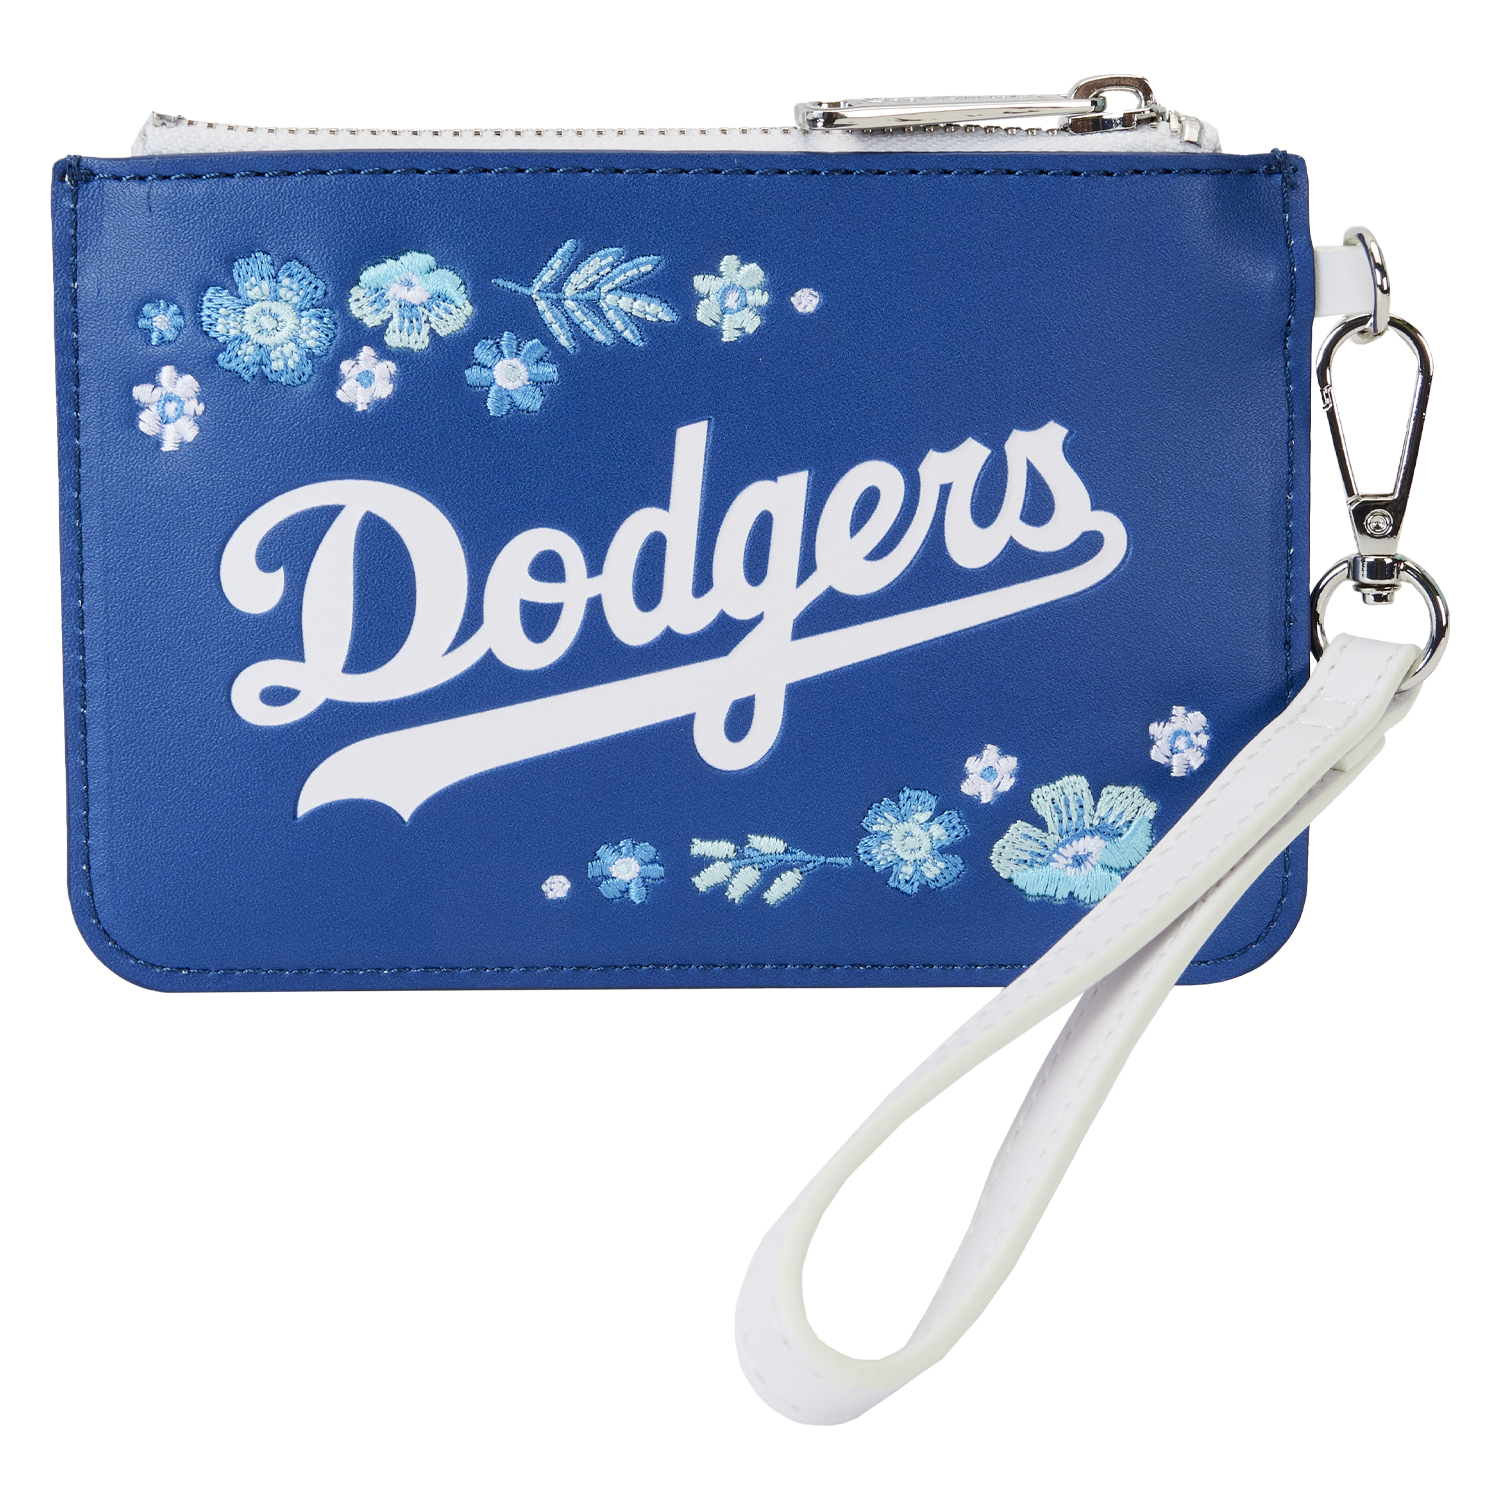 Buy MLB Los Angeles Dodgers Floral Card Holder Wristlet Clutch at Loungefly.